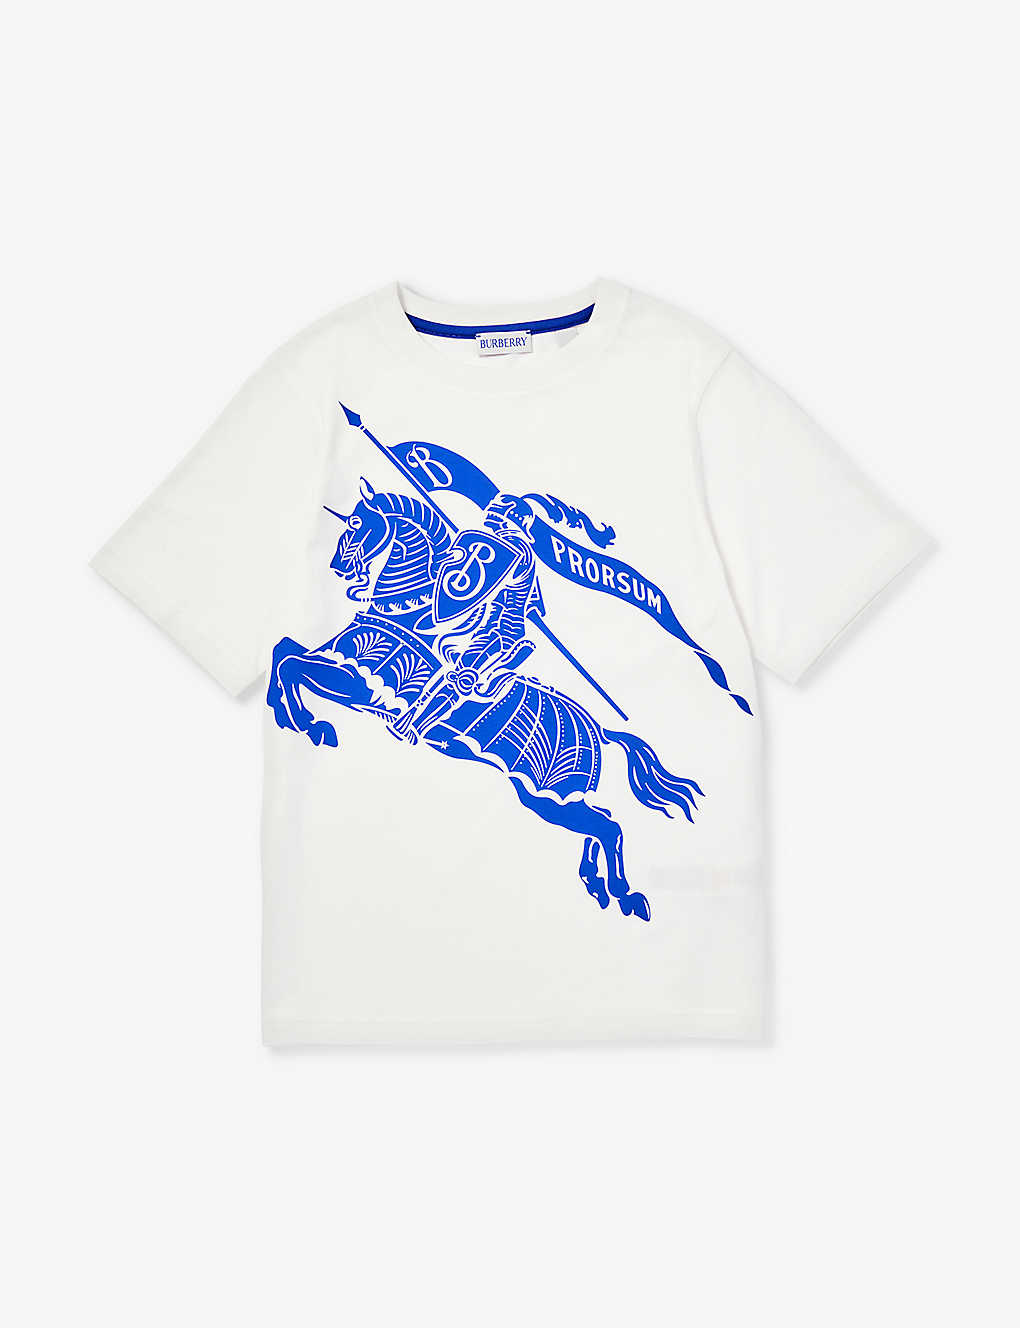 Burberry Boys Salt Kids Knight Graphic-print Cotton-jersey T-shirt 3-14 Years In Multi-coloured